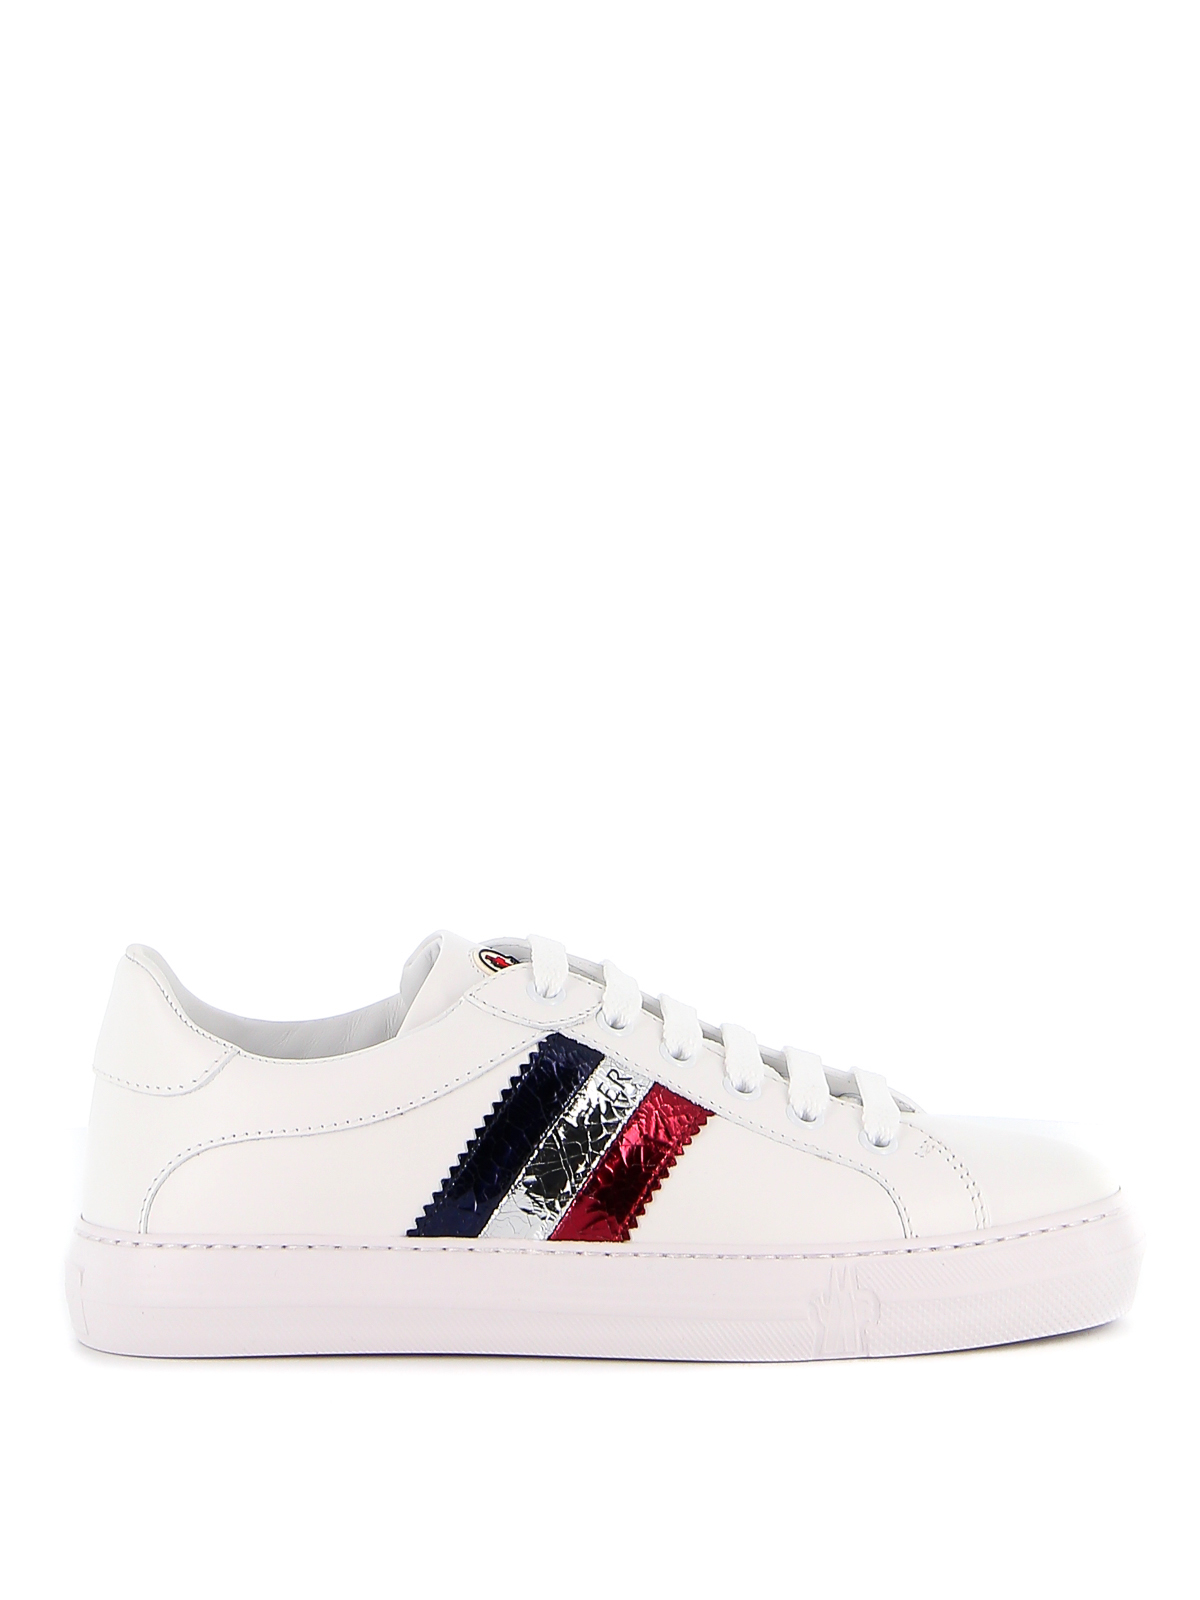 Trainers Moncler - Ariel sneakers - 4M7044001ALG002 | Shop online at iKRIX